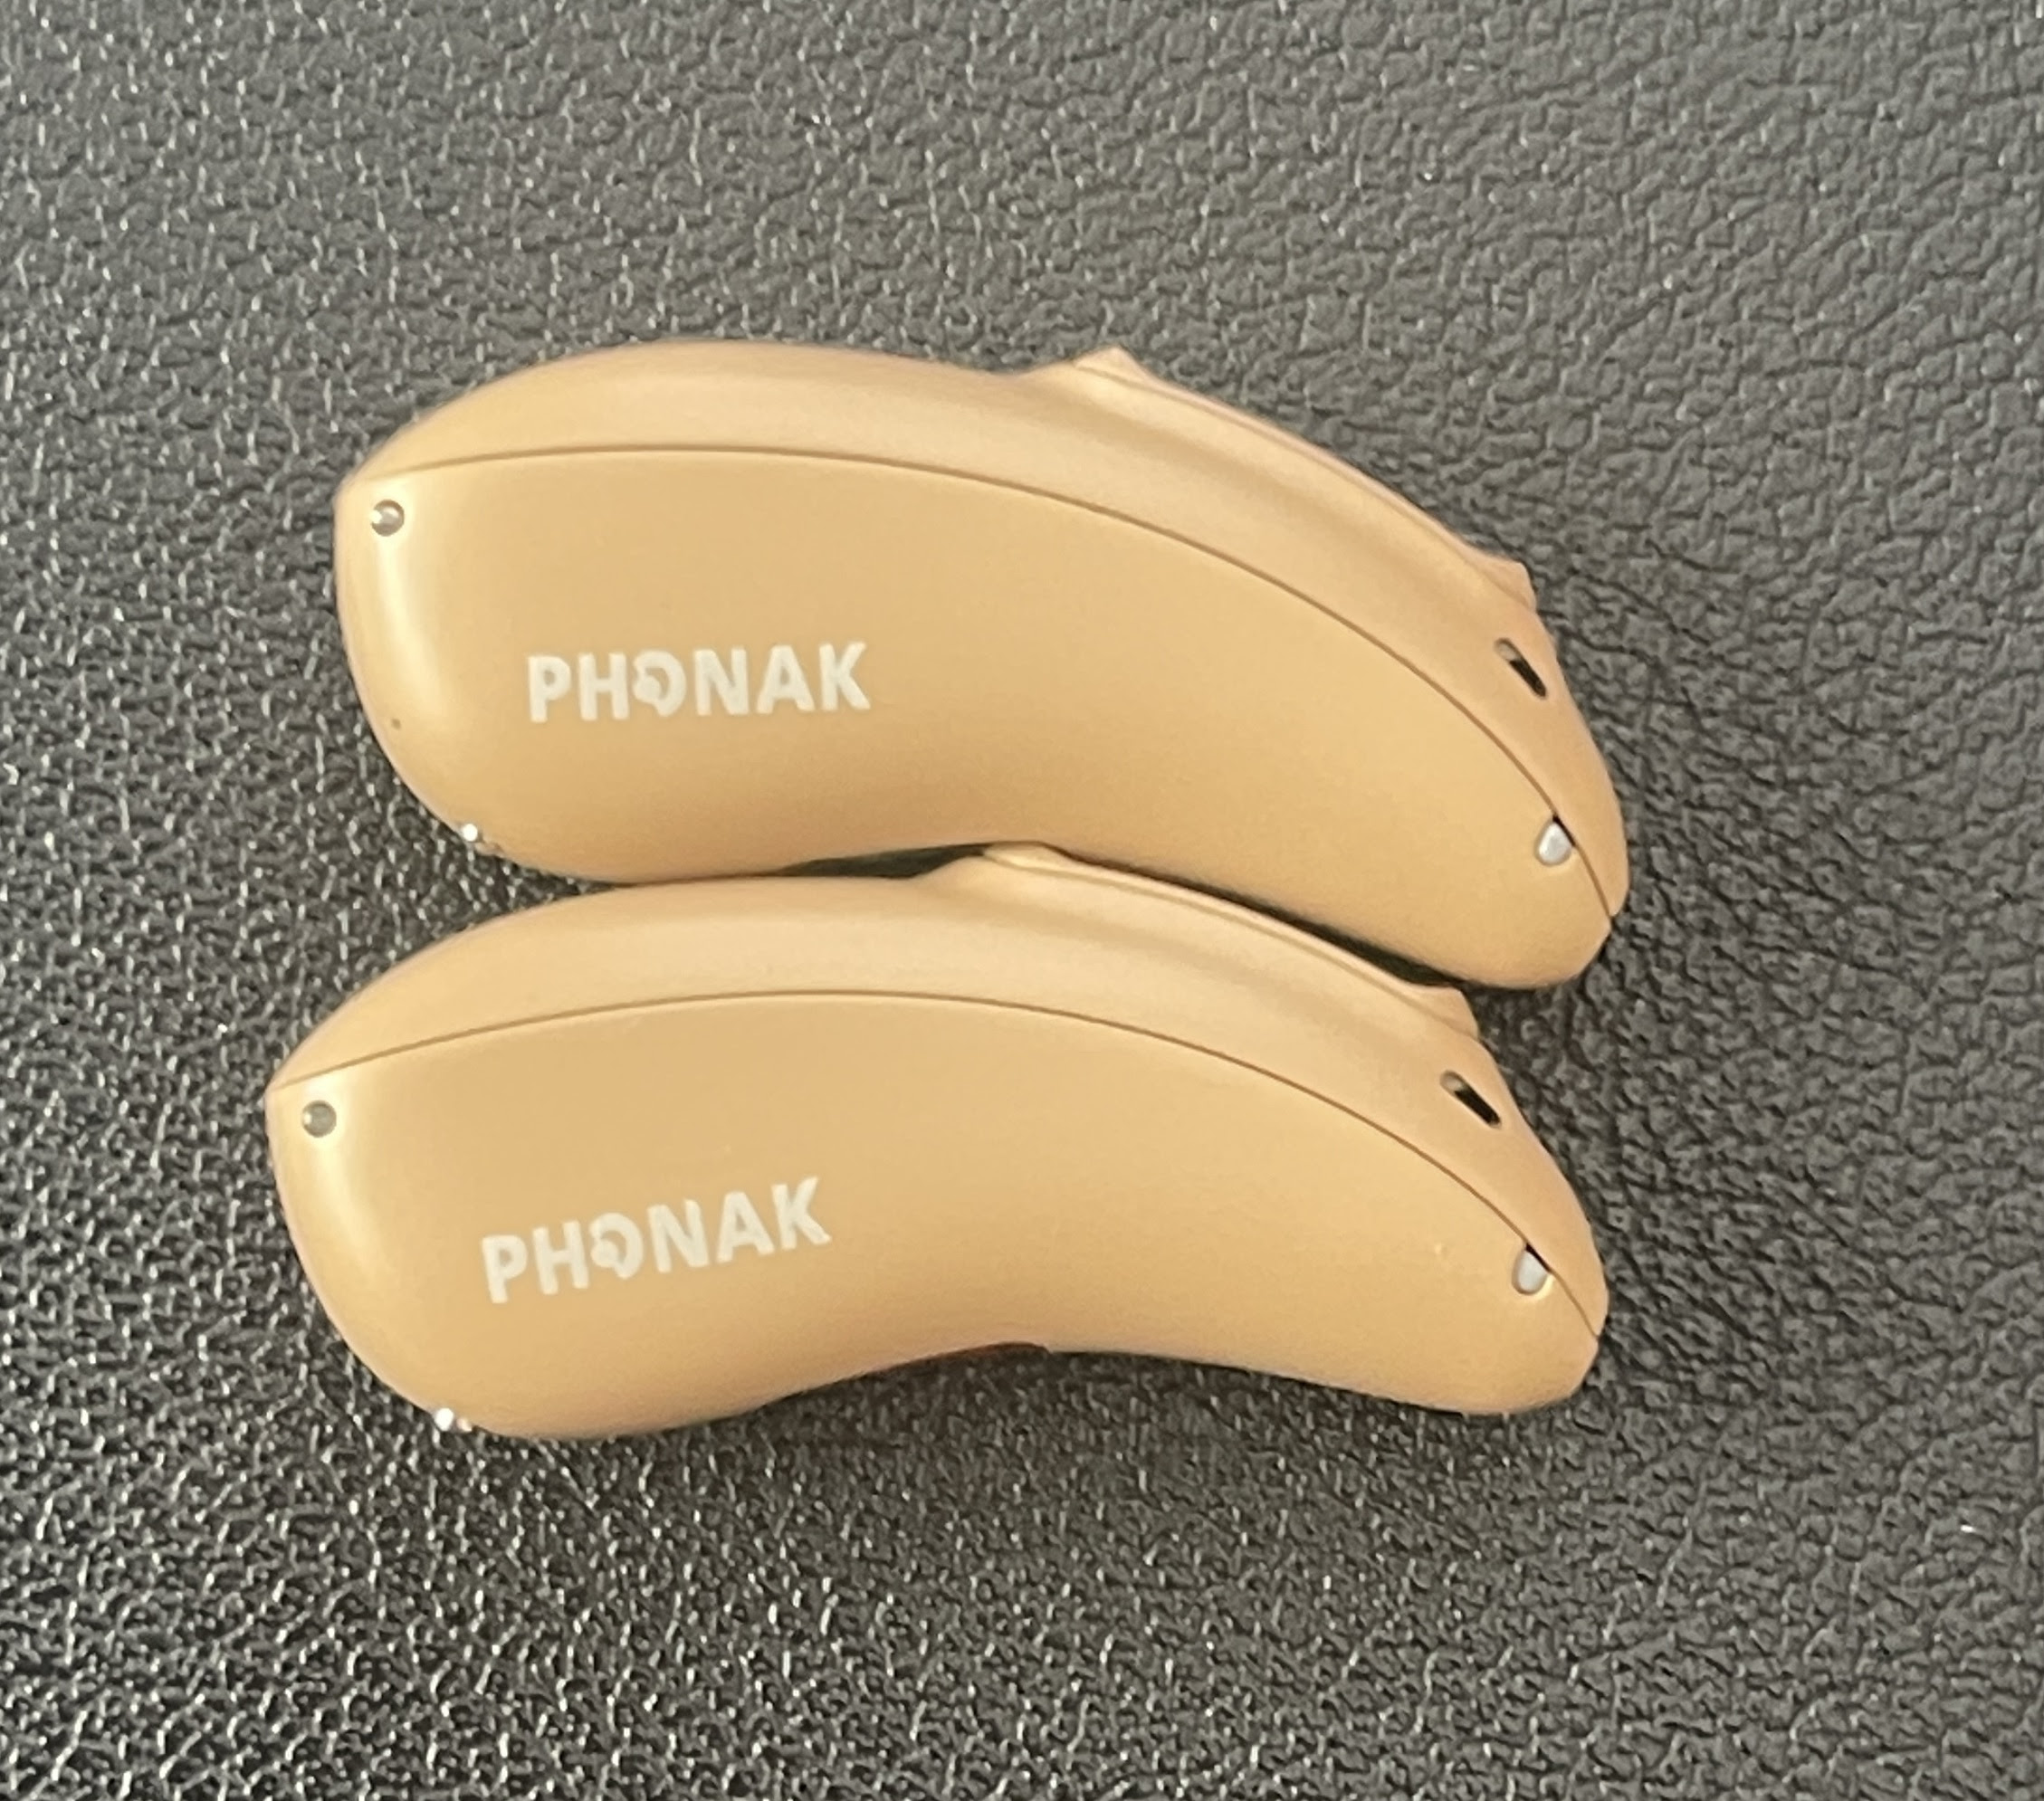 Phonak Paradise P90r Hearing Aids - GREAT for eBay  - One Pair MSRP is $4,000 - 22 Pairs Total IN STOCK